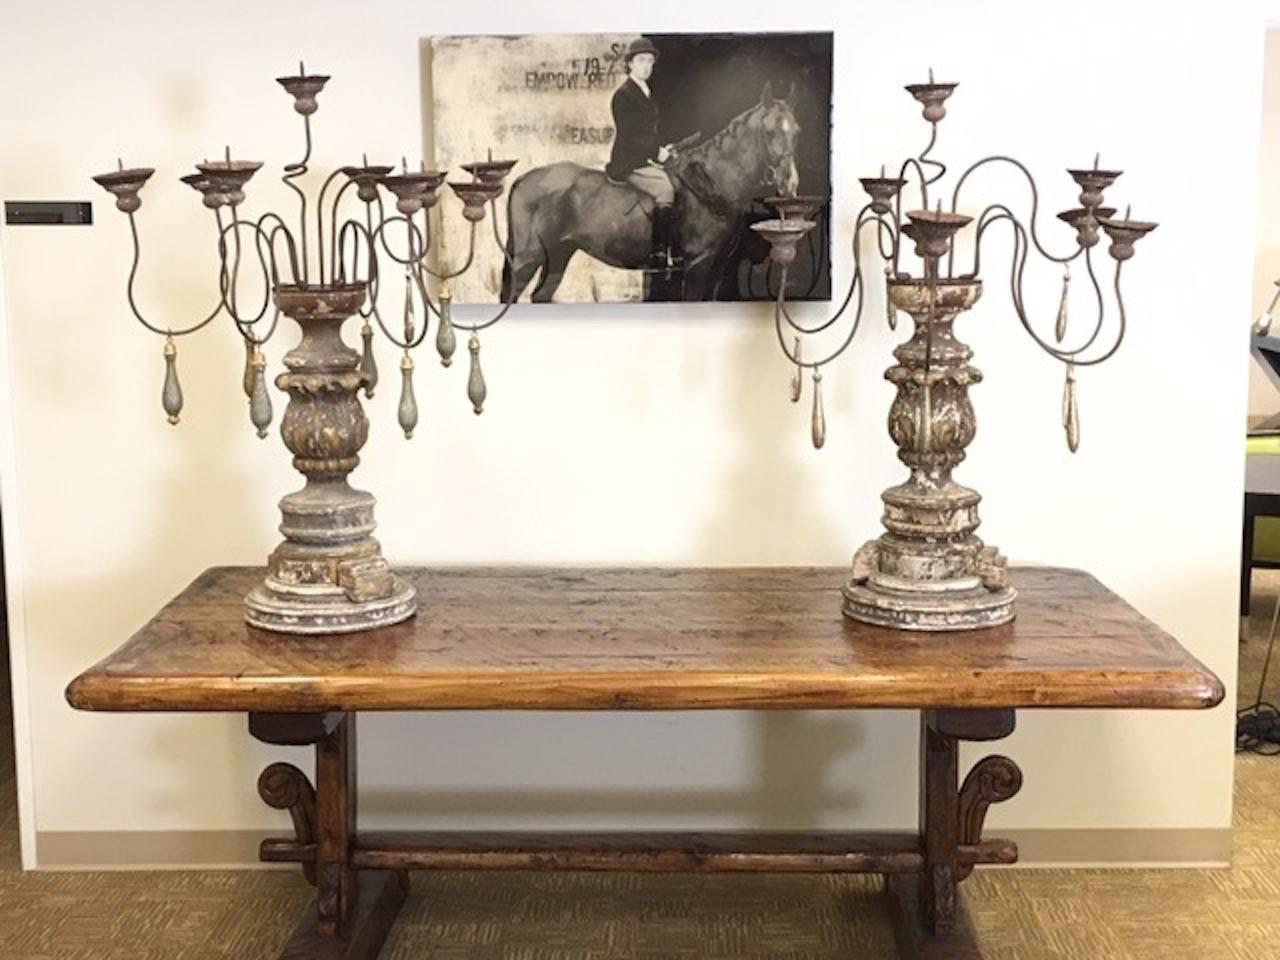 Antique Portuguese Candelabra with Polychrome Finish and Rusted Iron Details In Distressed Condition For Sale In Phoenix, AZ